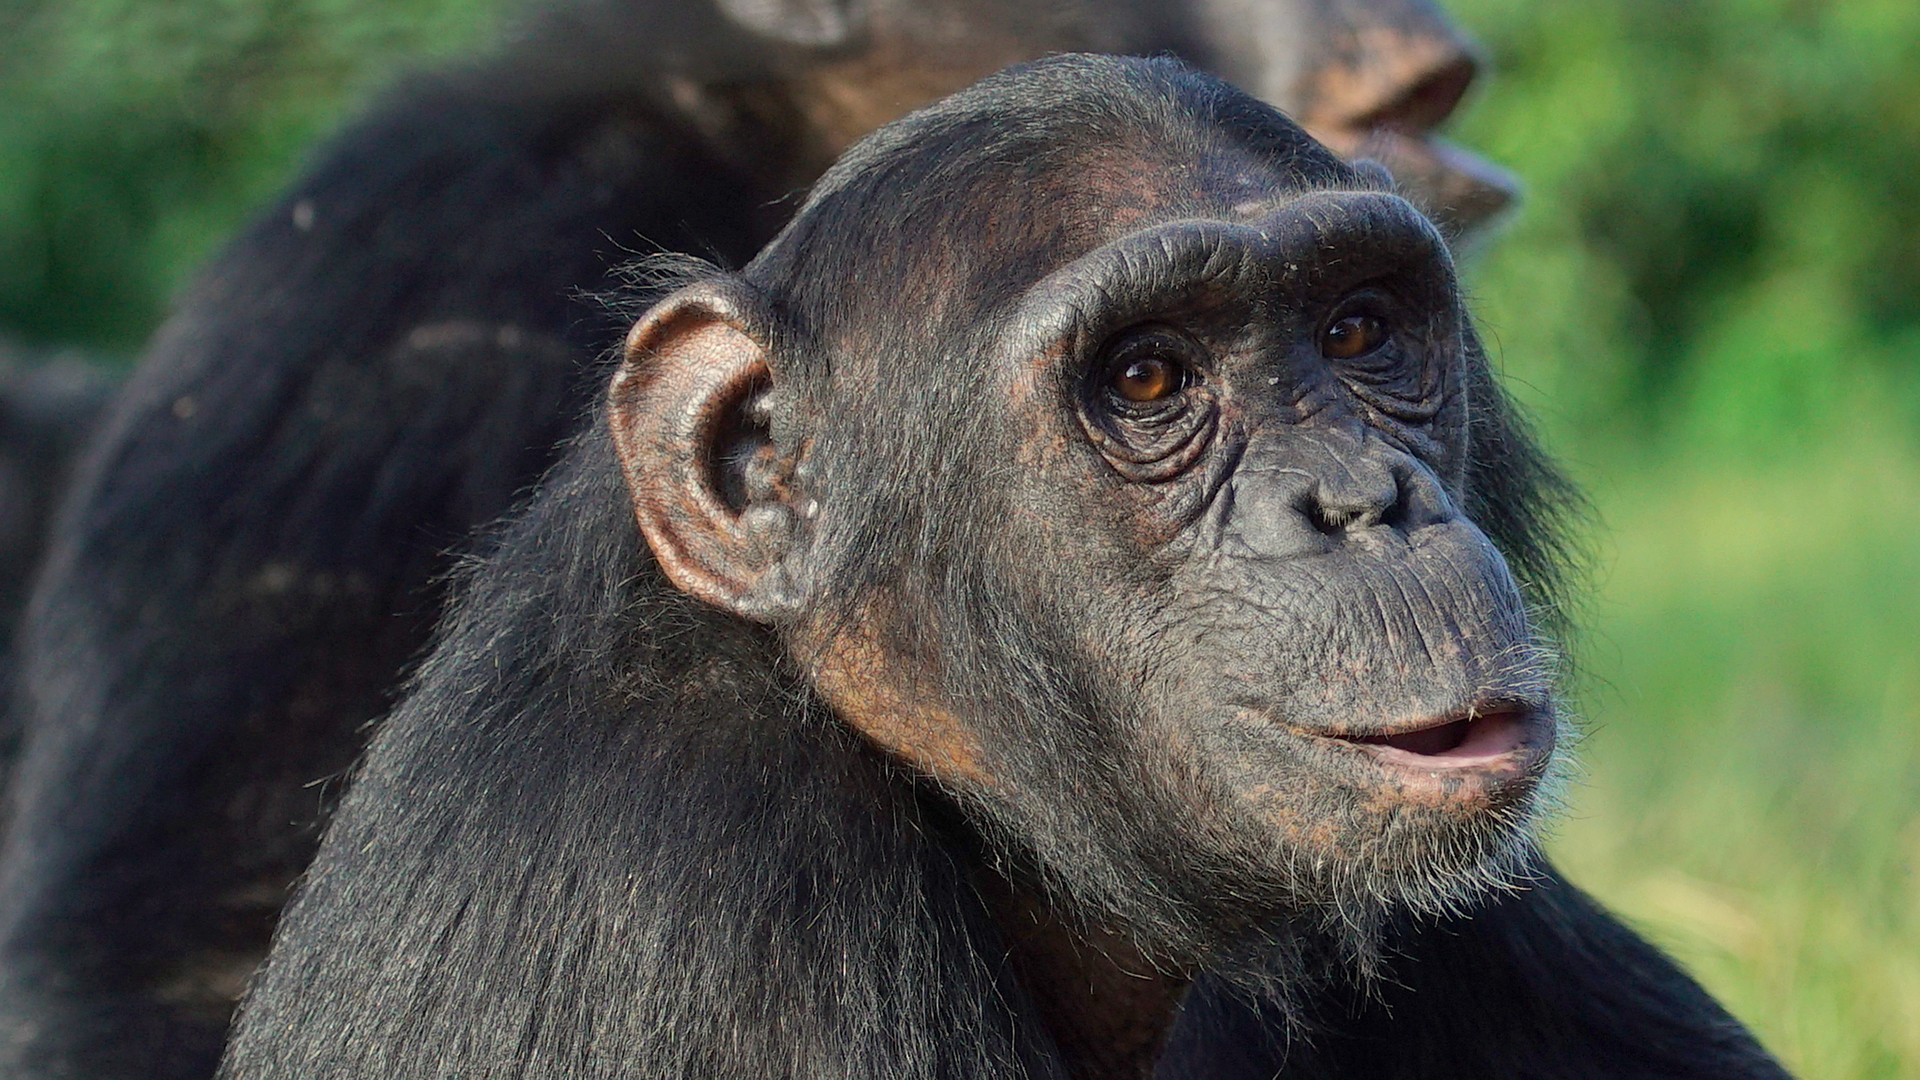 A young chimpanzee looks towards the camera with a second chimpanzee sat behind her